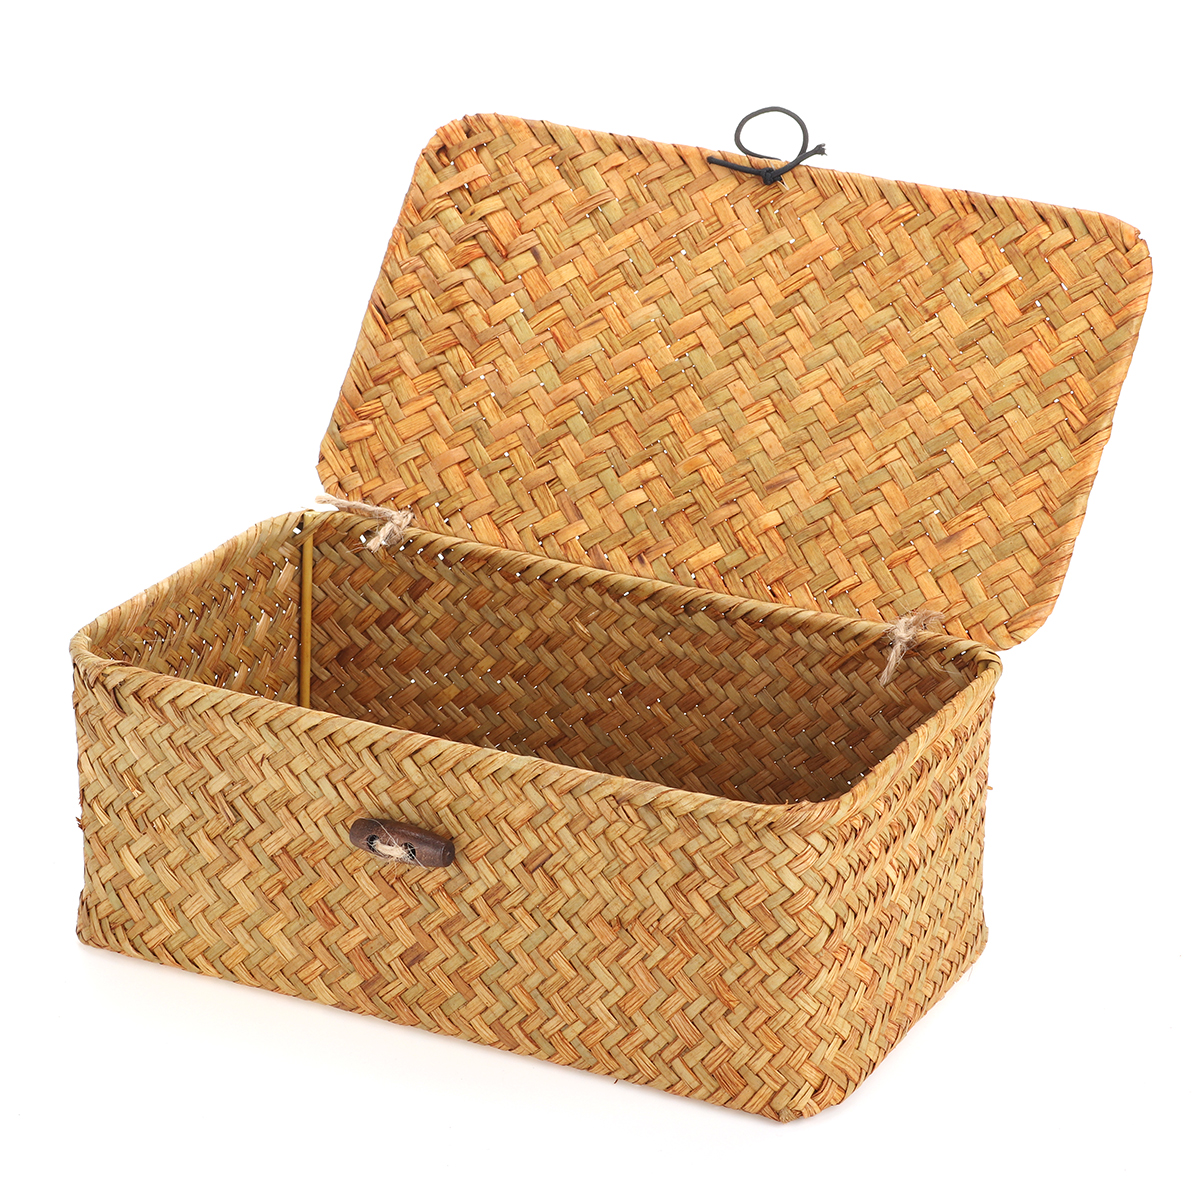 Storage-Box-Rectangular-Straw-Flower-Basket-with-Cover-Home-Garden-Fruit-Clothes-1748147-6